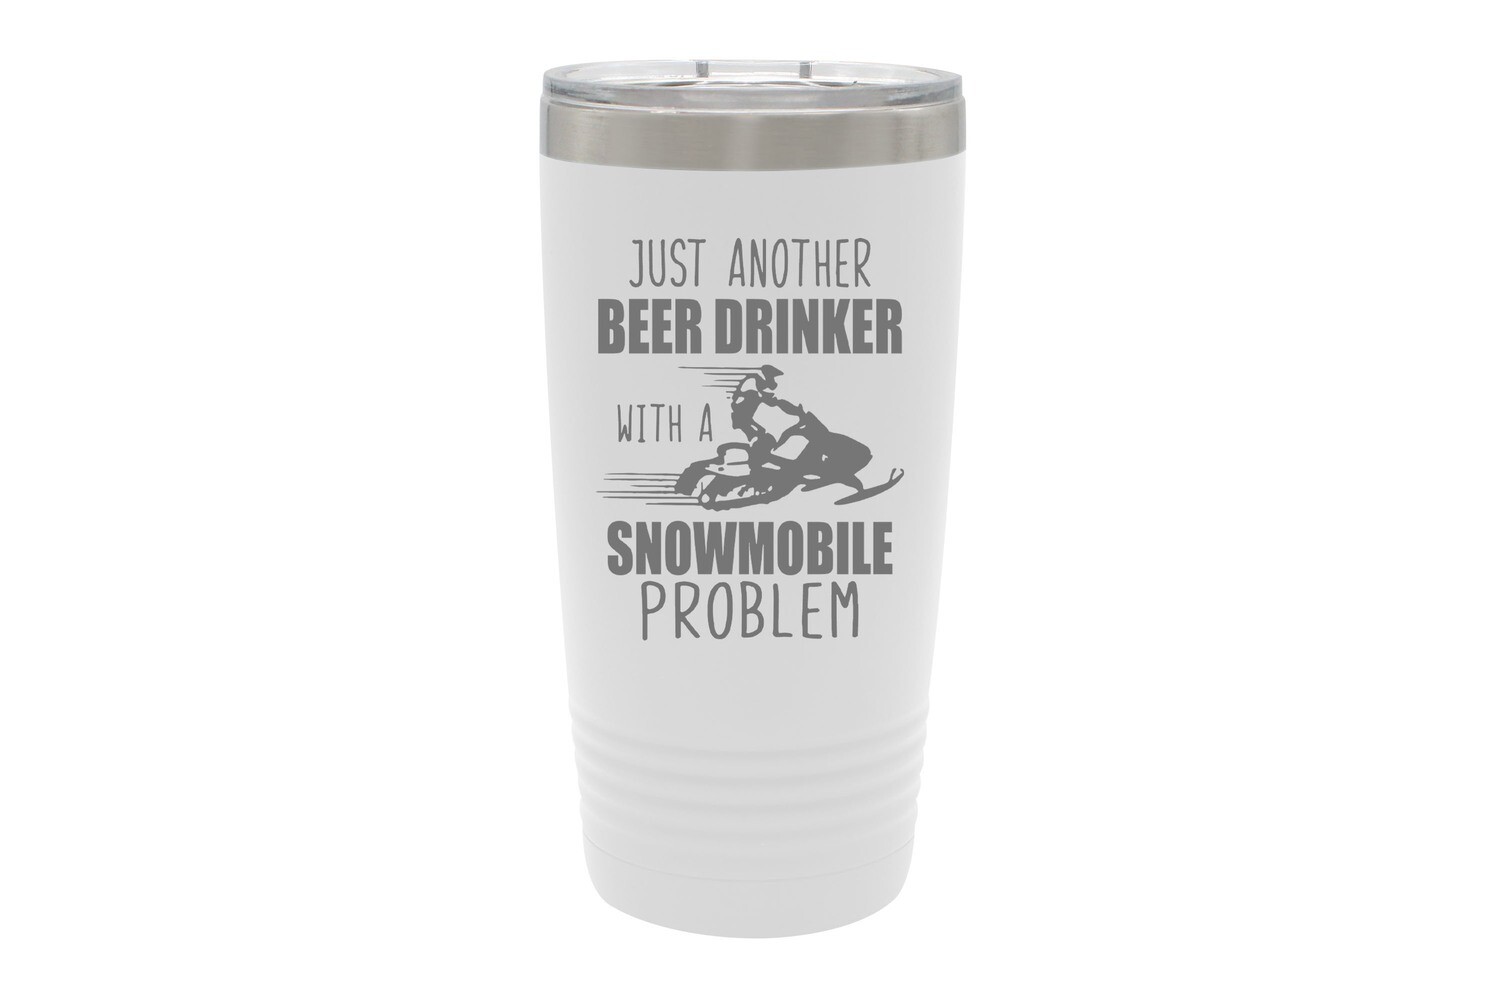 Just another Beer (or Your Choice) Drinker with a snowmobile problem Insulated Tumbler 20 oz